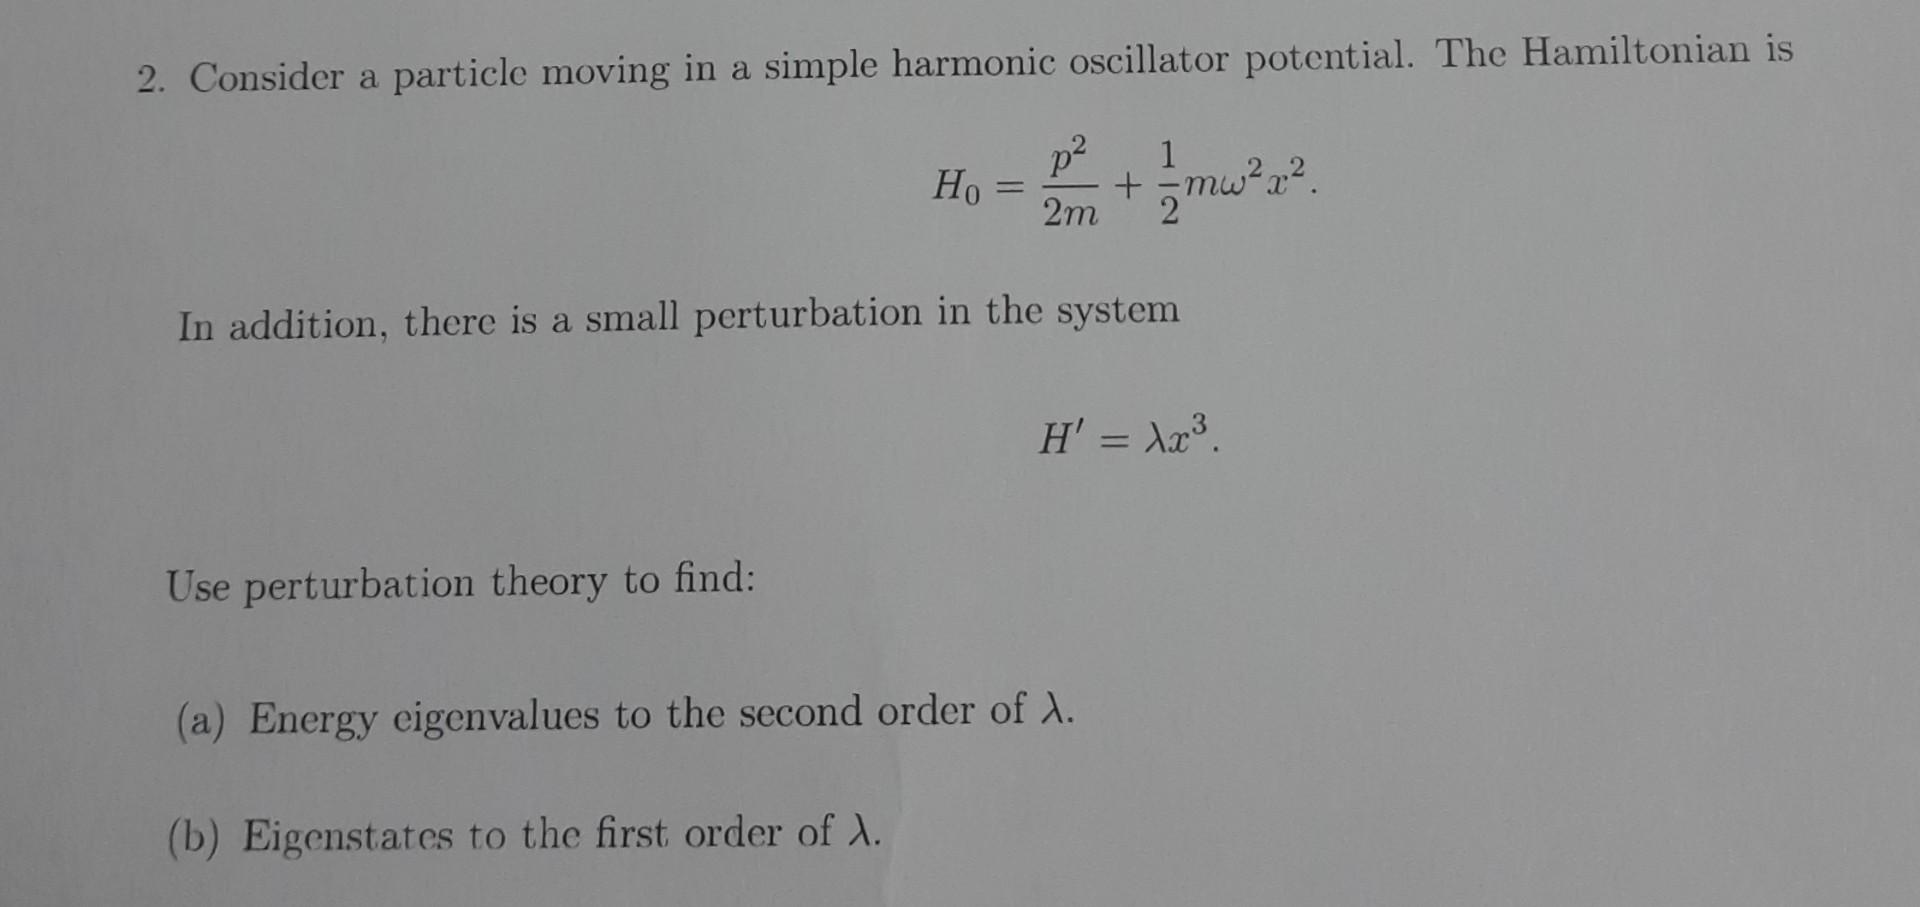 2. Consider a particle moving in a simple harmonic oscillator potential. The Hamiltonian is
\[
H_{0}=\frac{p^{2}}{2 m}+\frac{